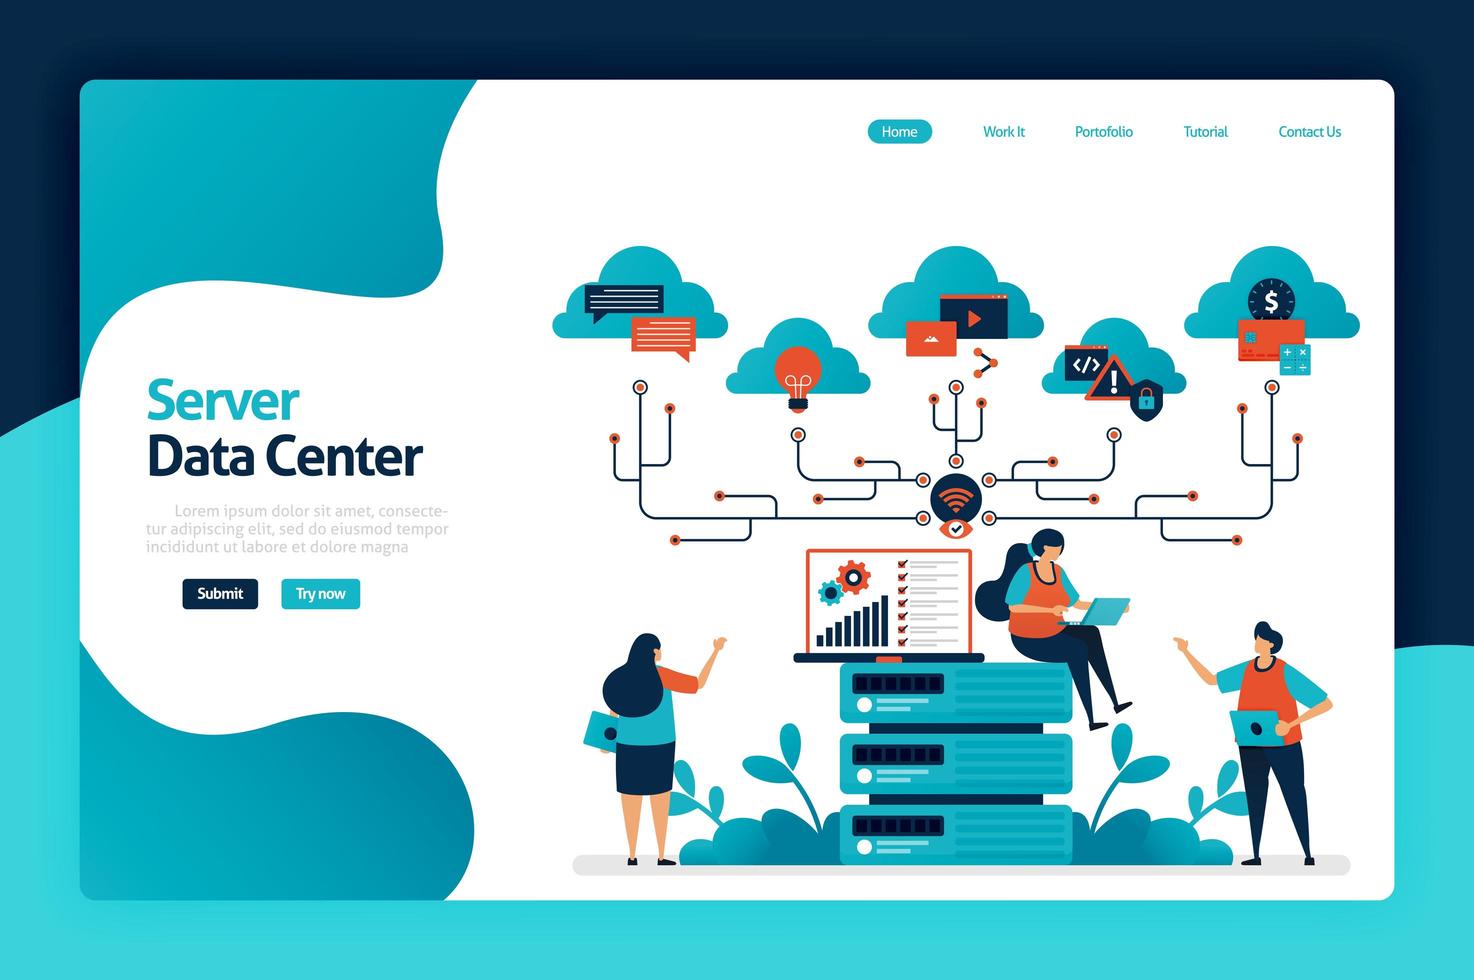 Server data center landing page design. data storage and analysis services in database, computing support and big data management services. vector illustration for poster, website, flyer, mobile app